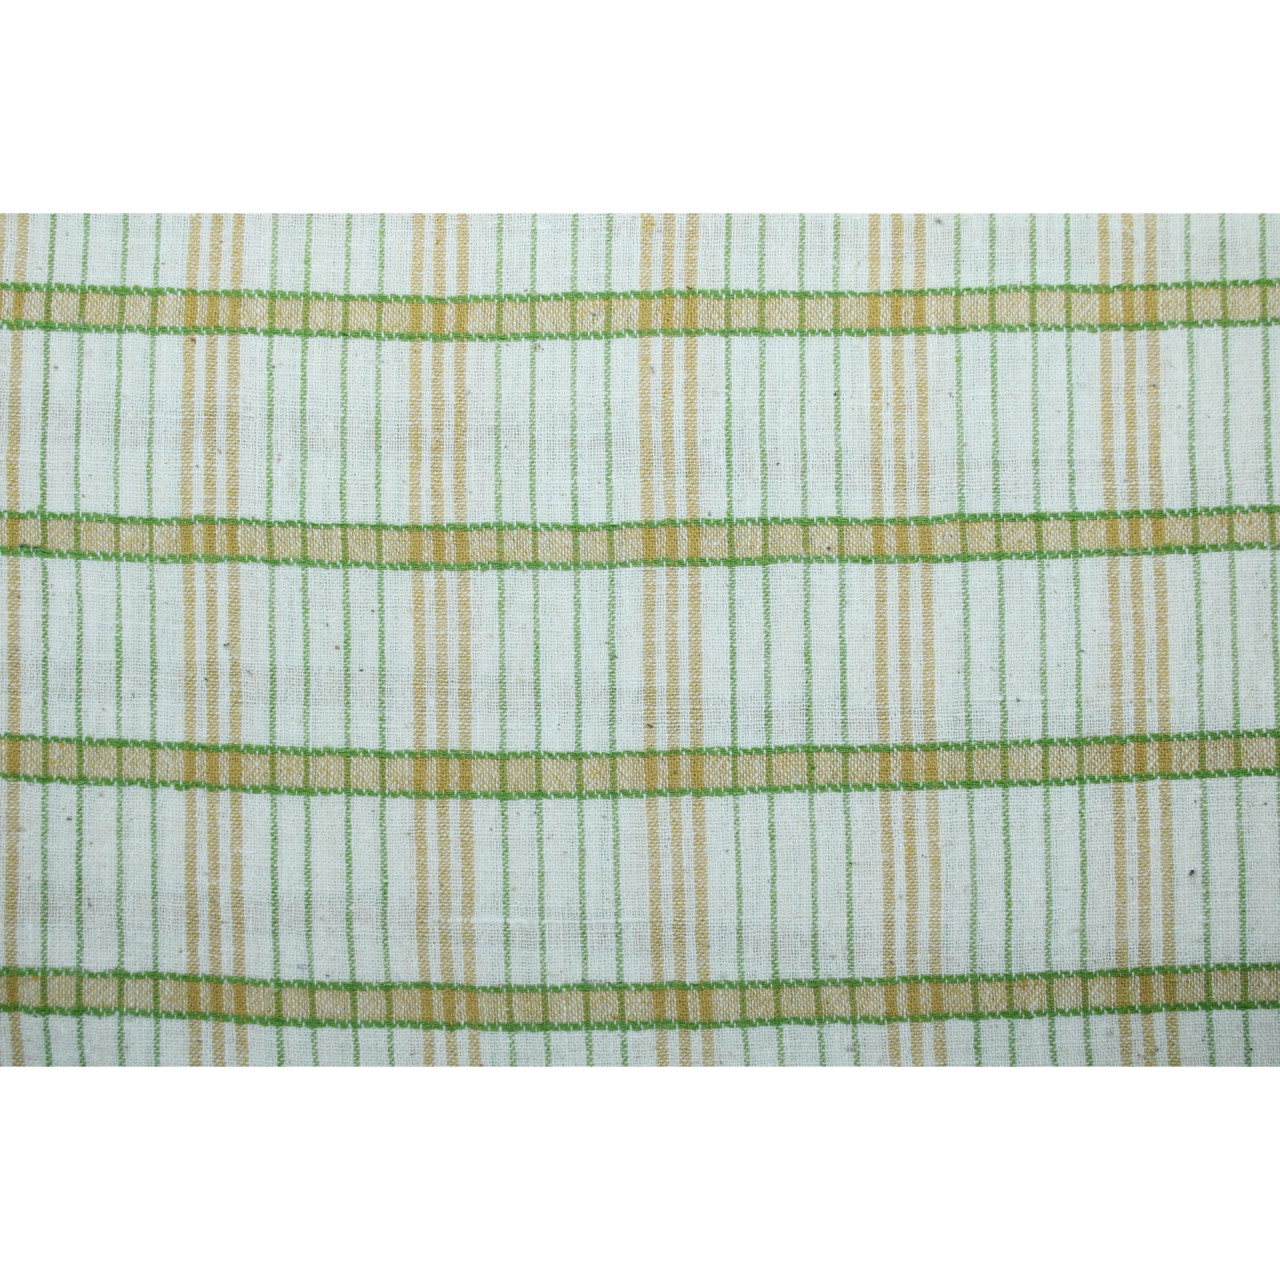 (2124) Kala cotton Azo-free dyed Kutchy yardage from Kutch with extra-weft - Green, yellow, white, stripes, textured